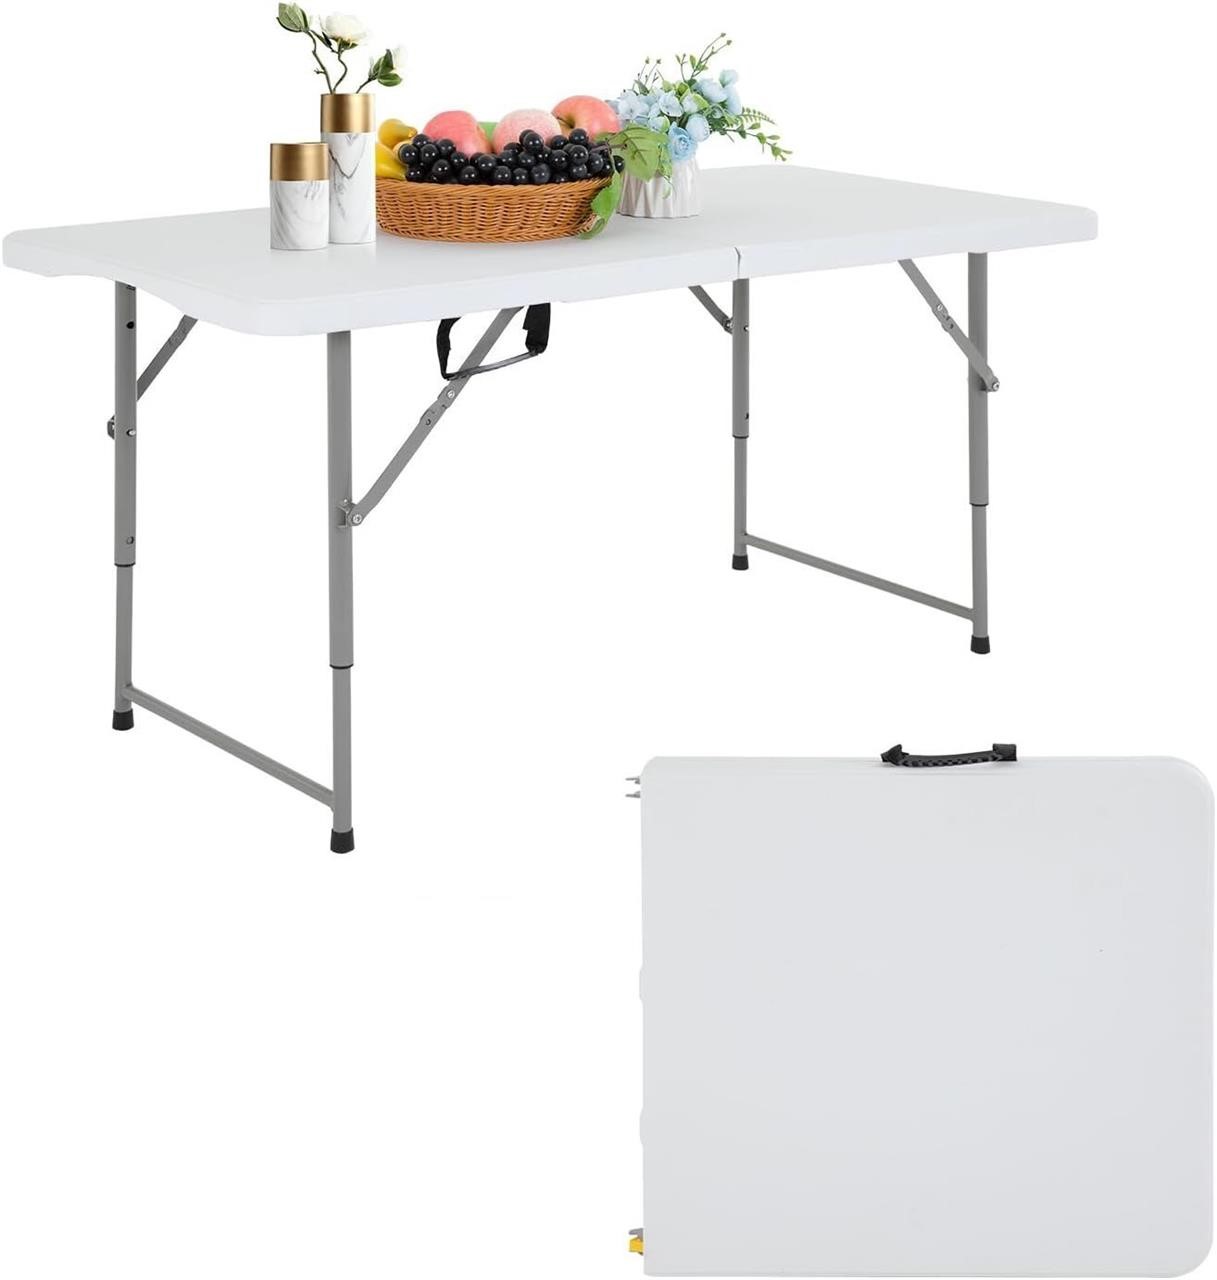 PayLessHere Folding Table